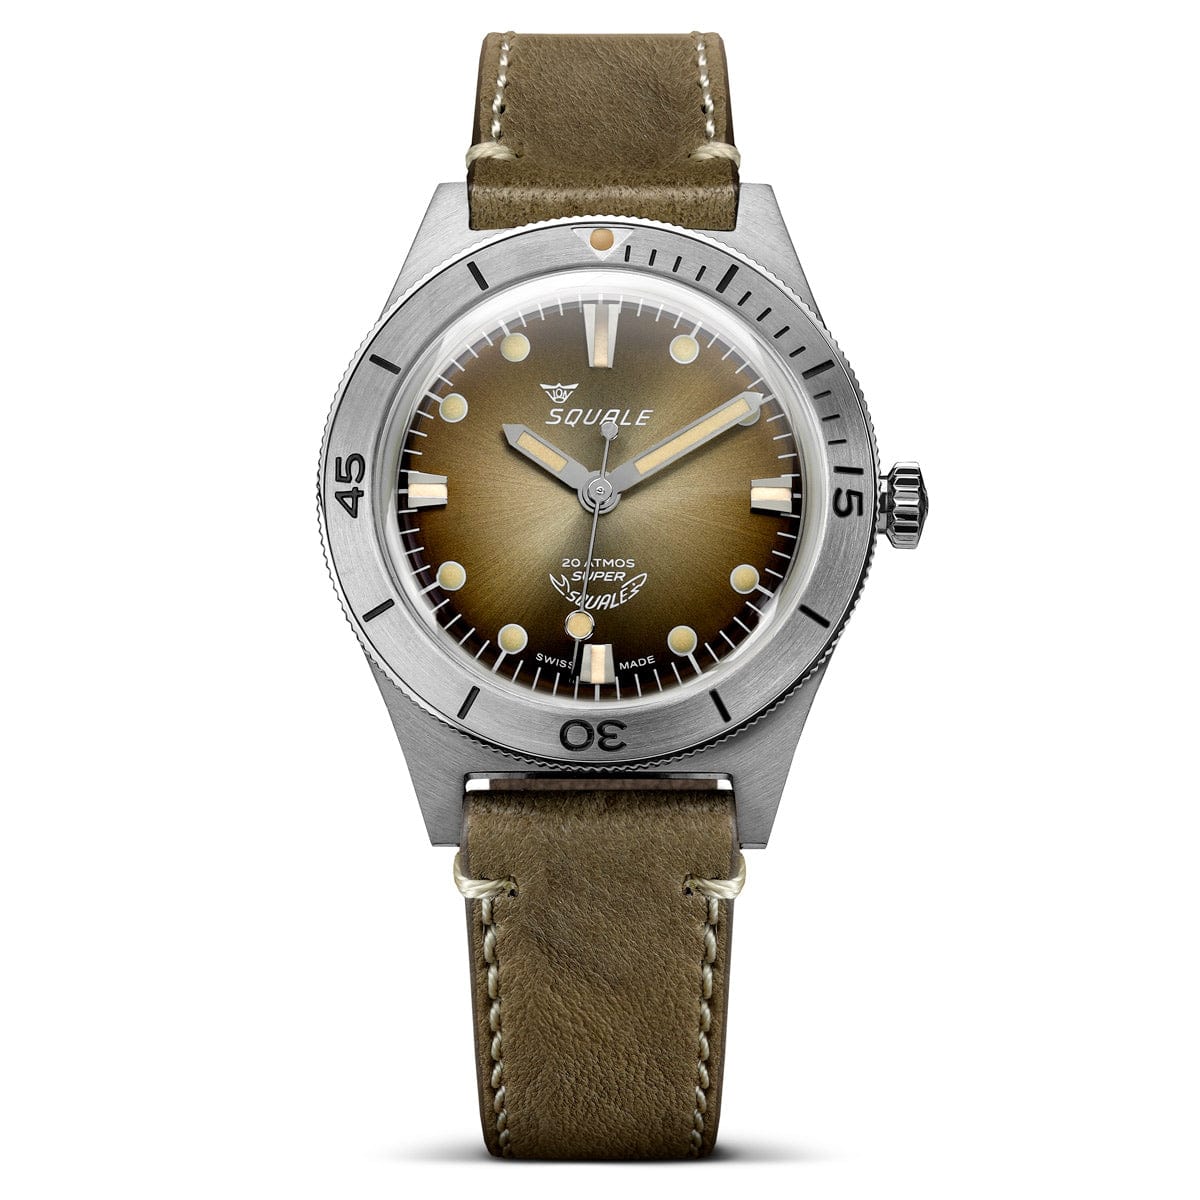 Super Squale Diver's Watch - Sunray Brown Dial - Brown Leather Strap